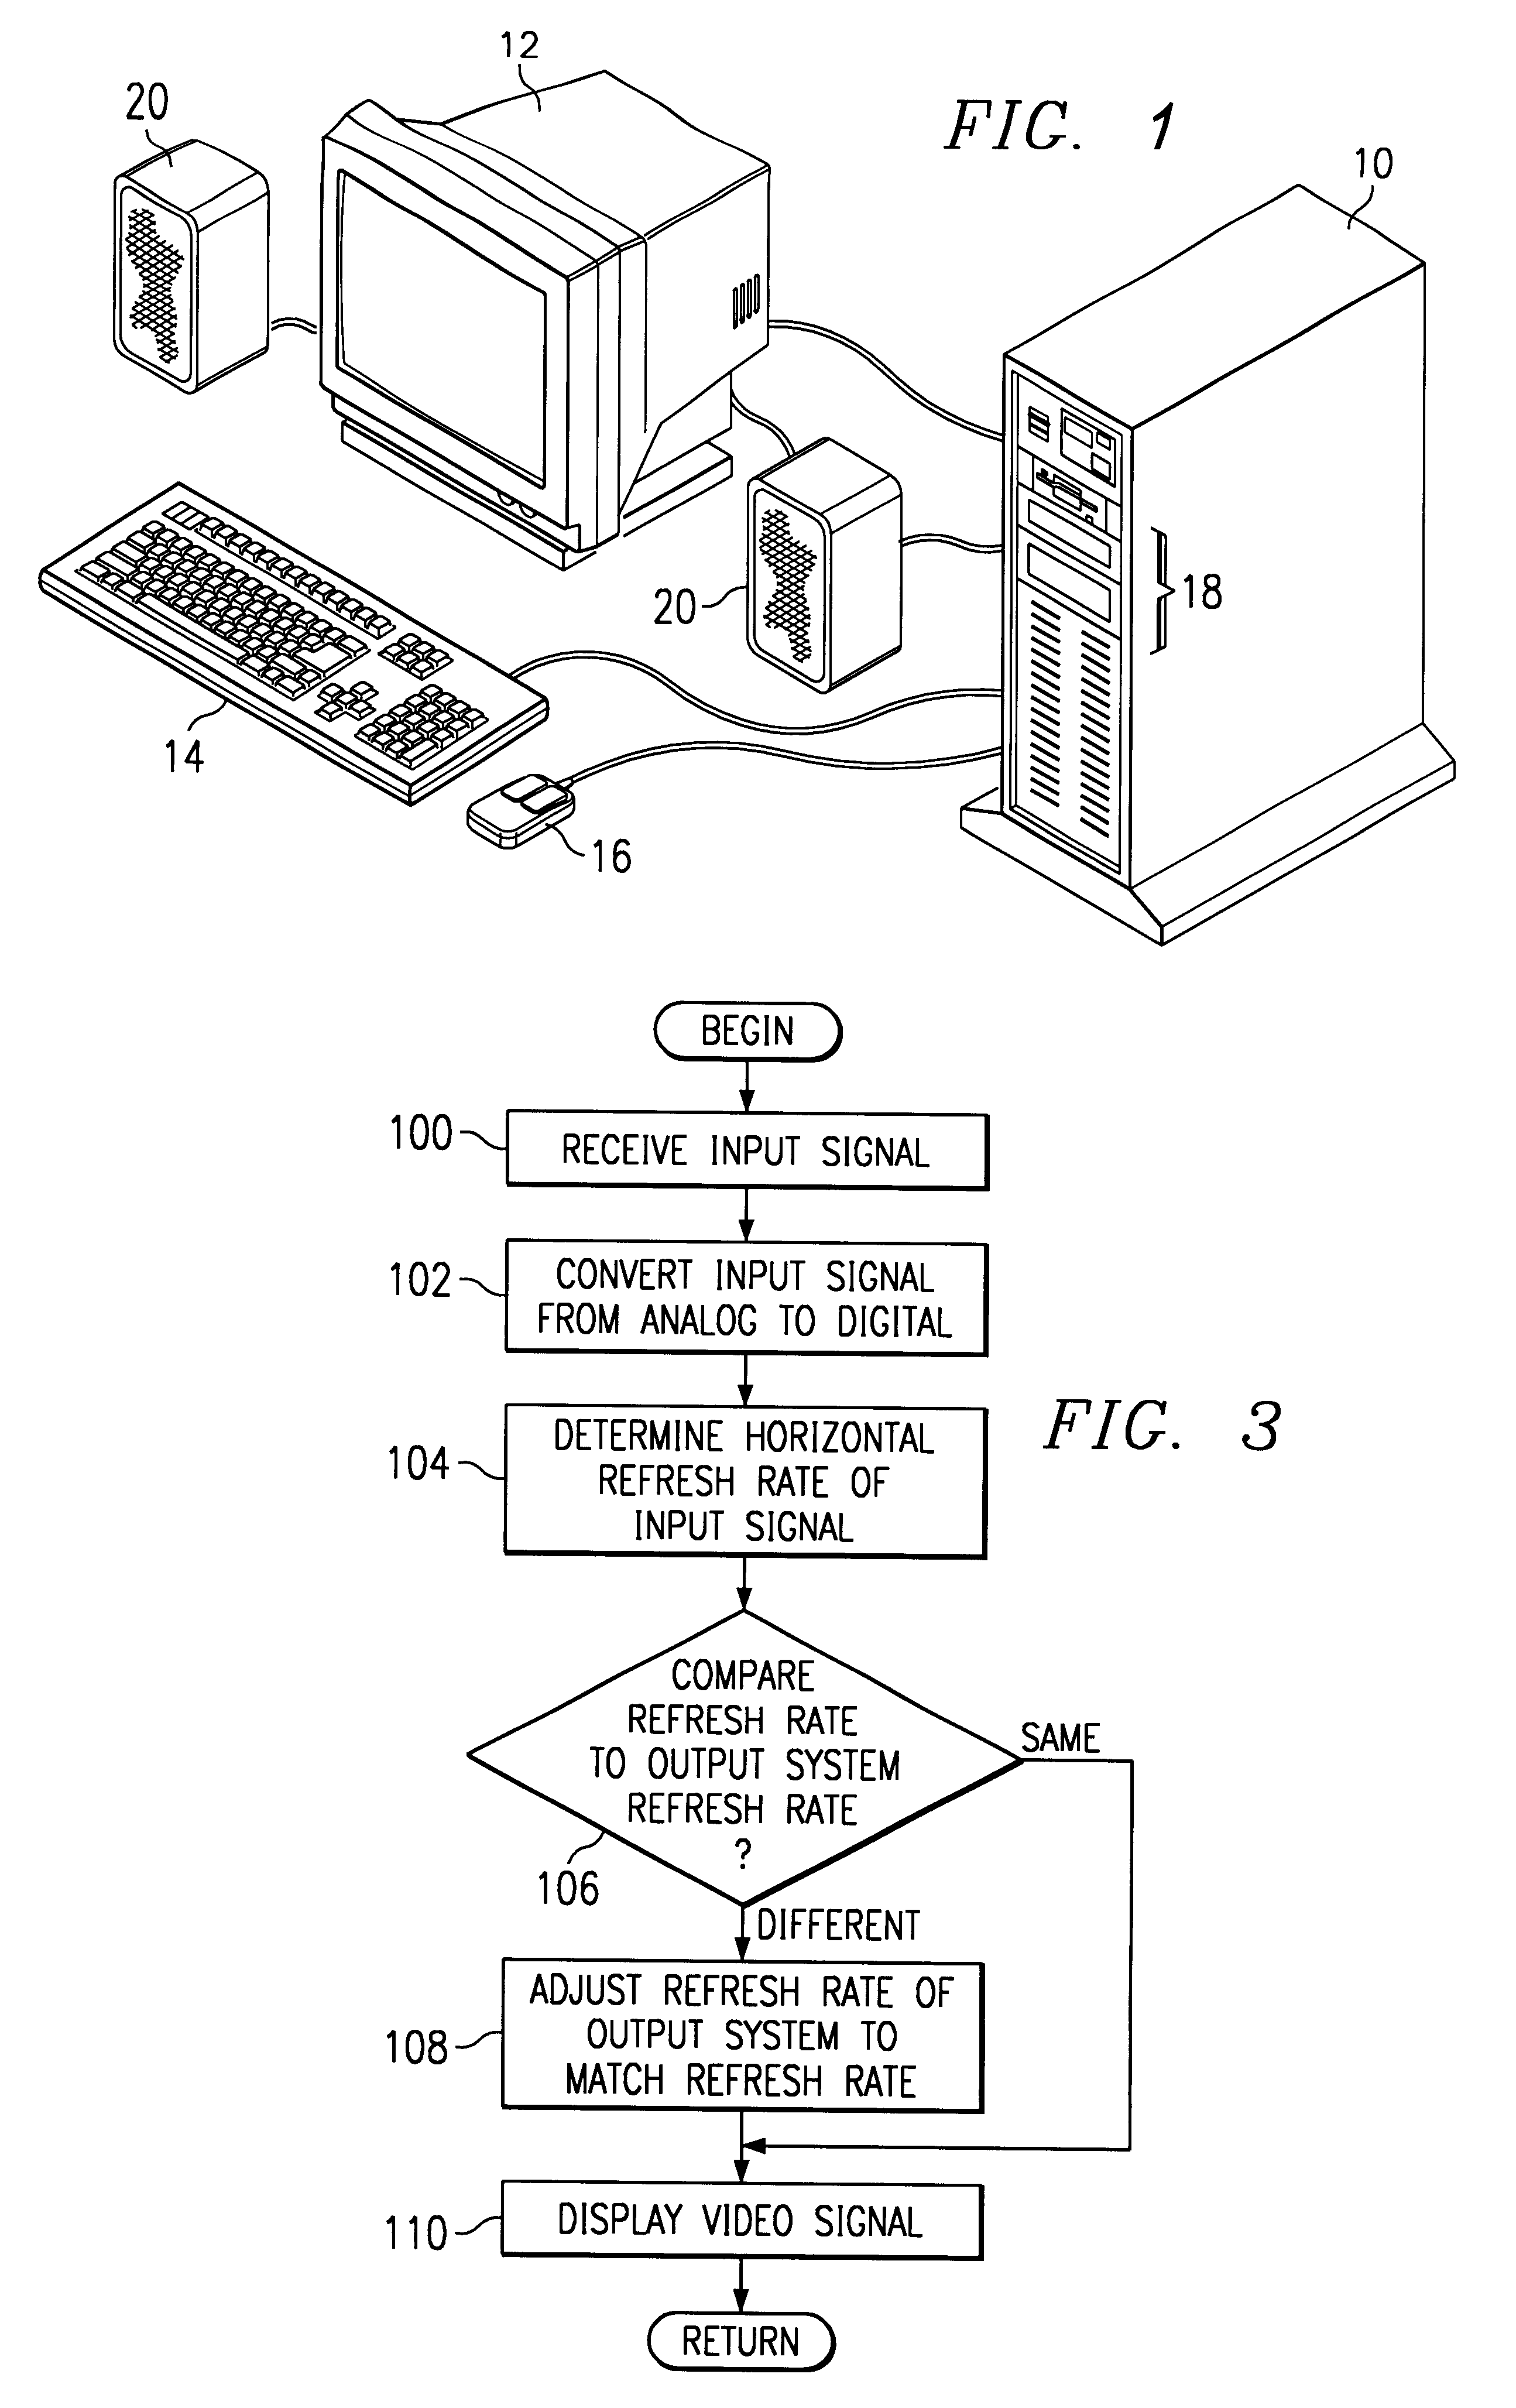 Apparatus for providing video resolution compensation when converting one video source to another video source